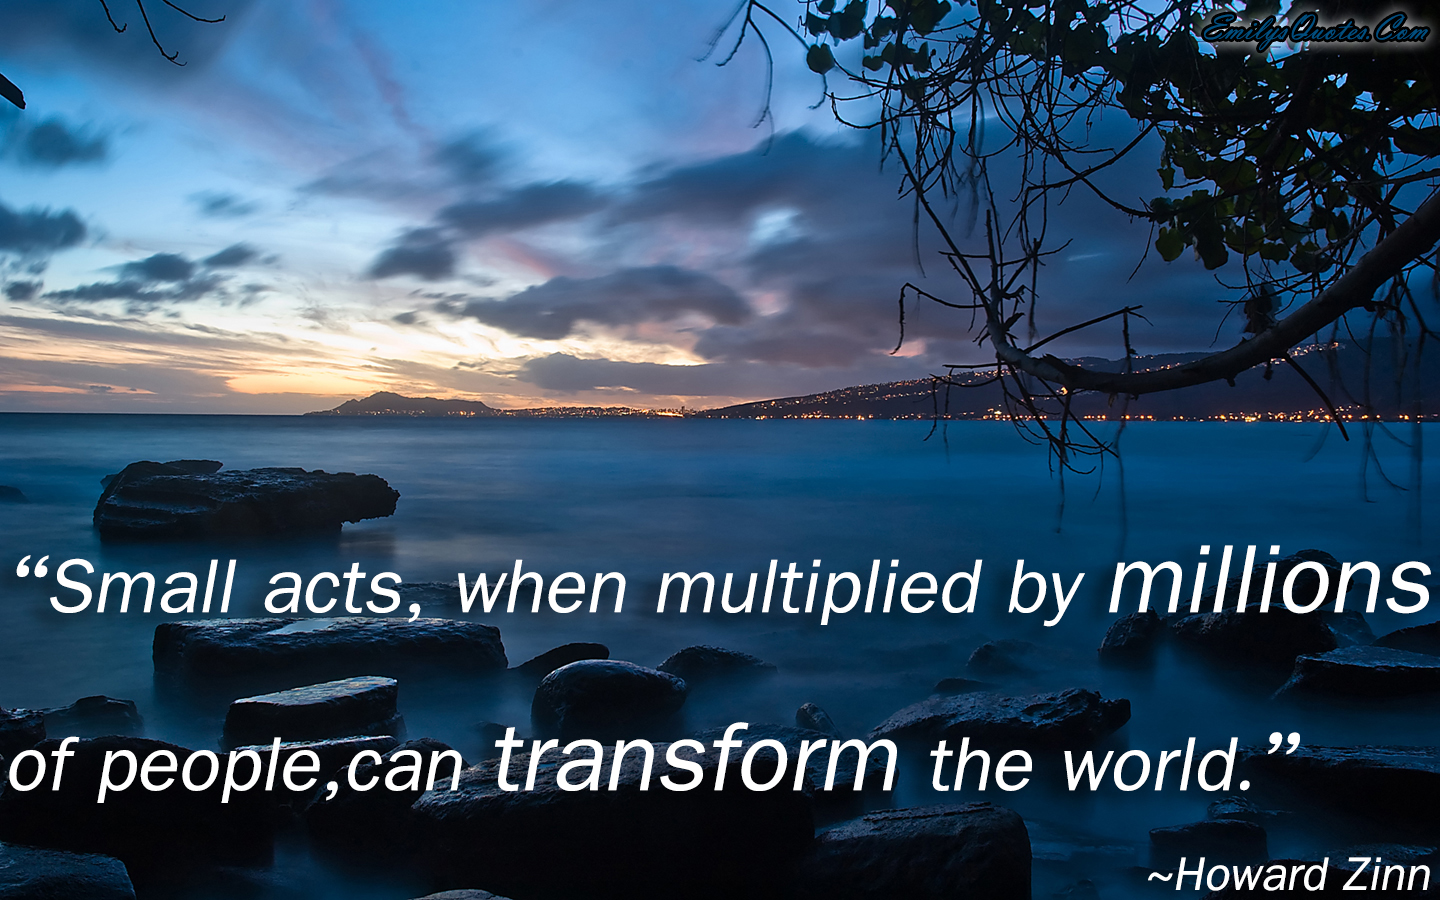 Small acts, when multiplied by millions of people,can transform the world